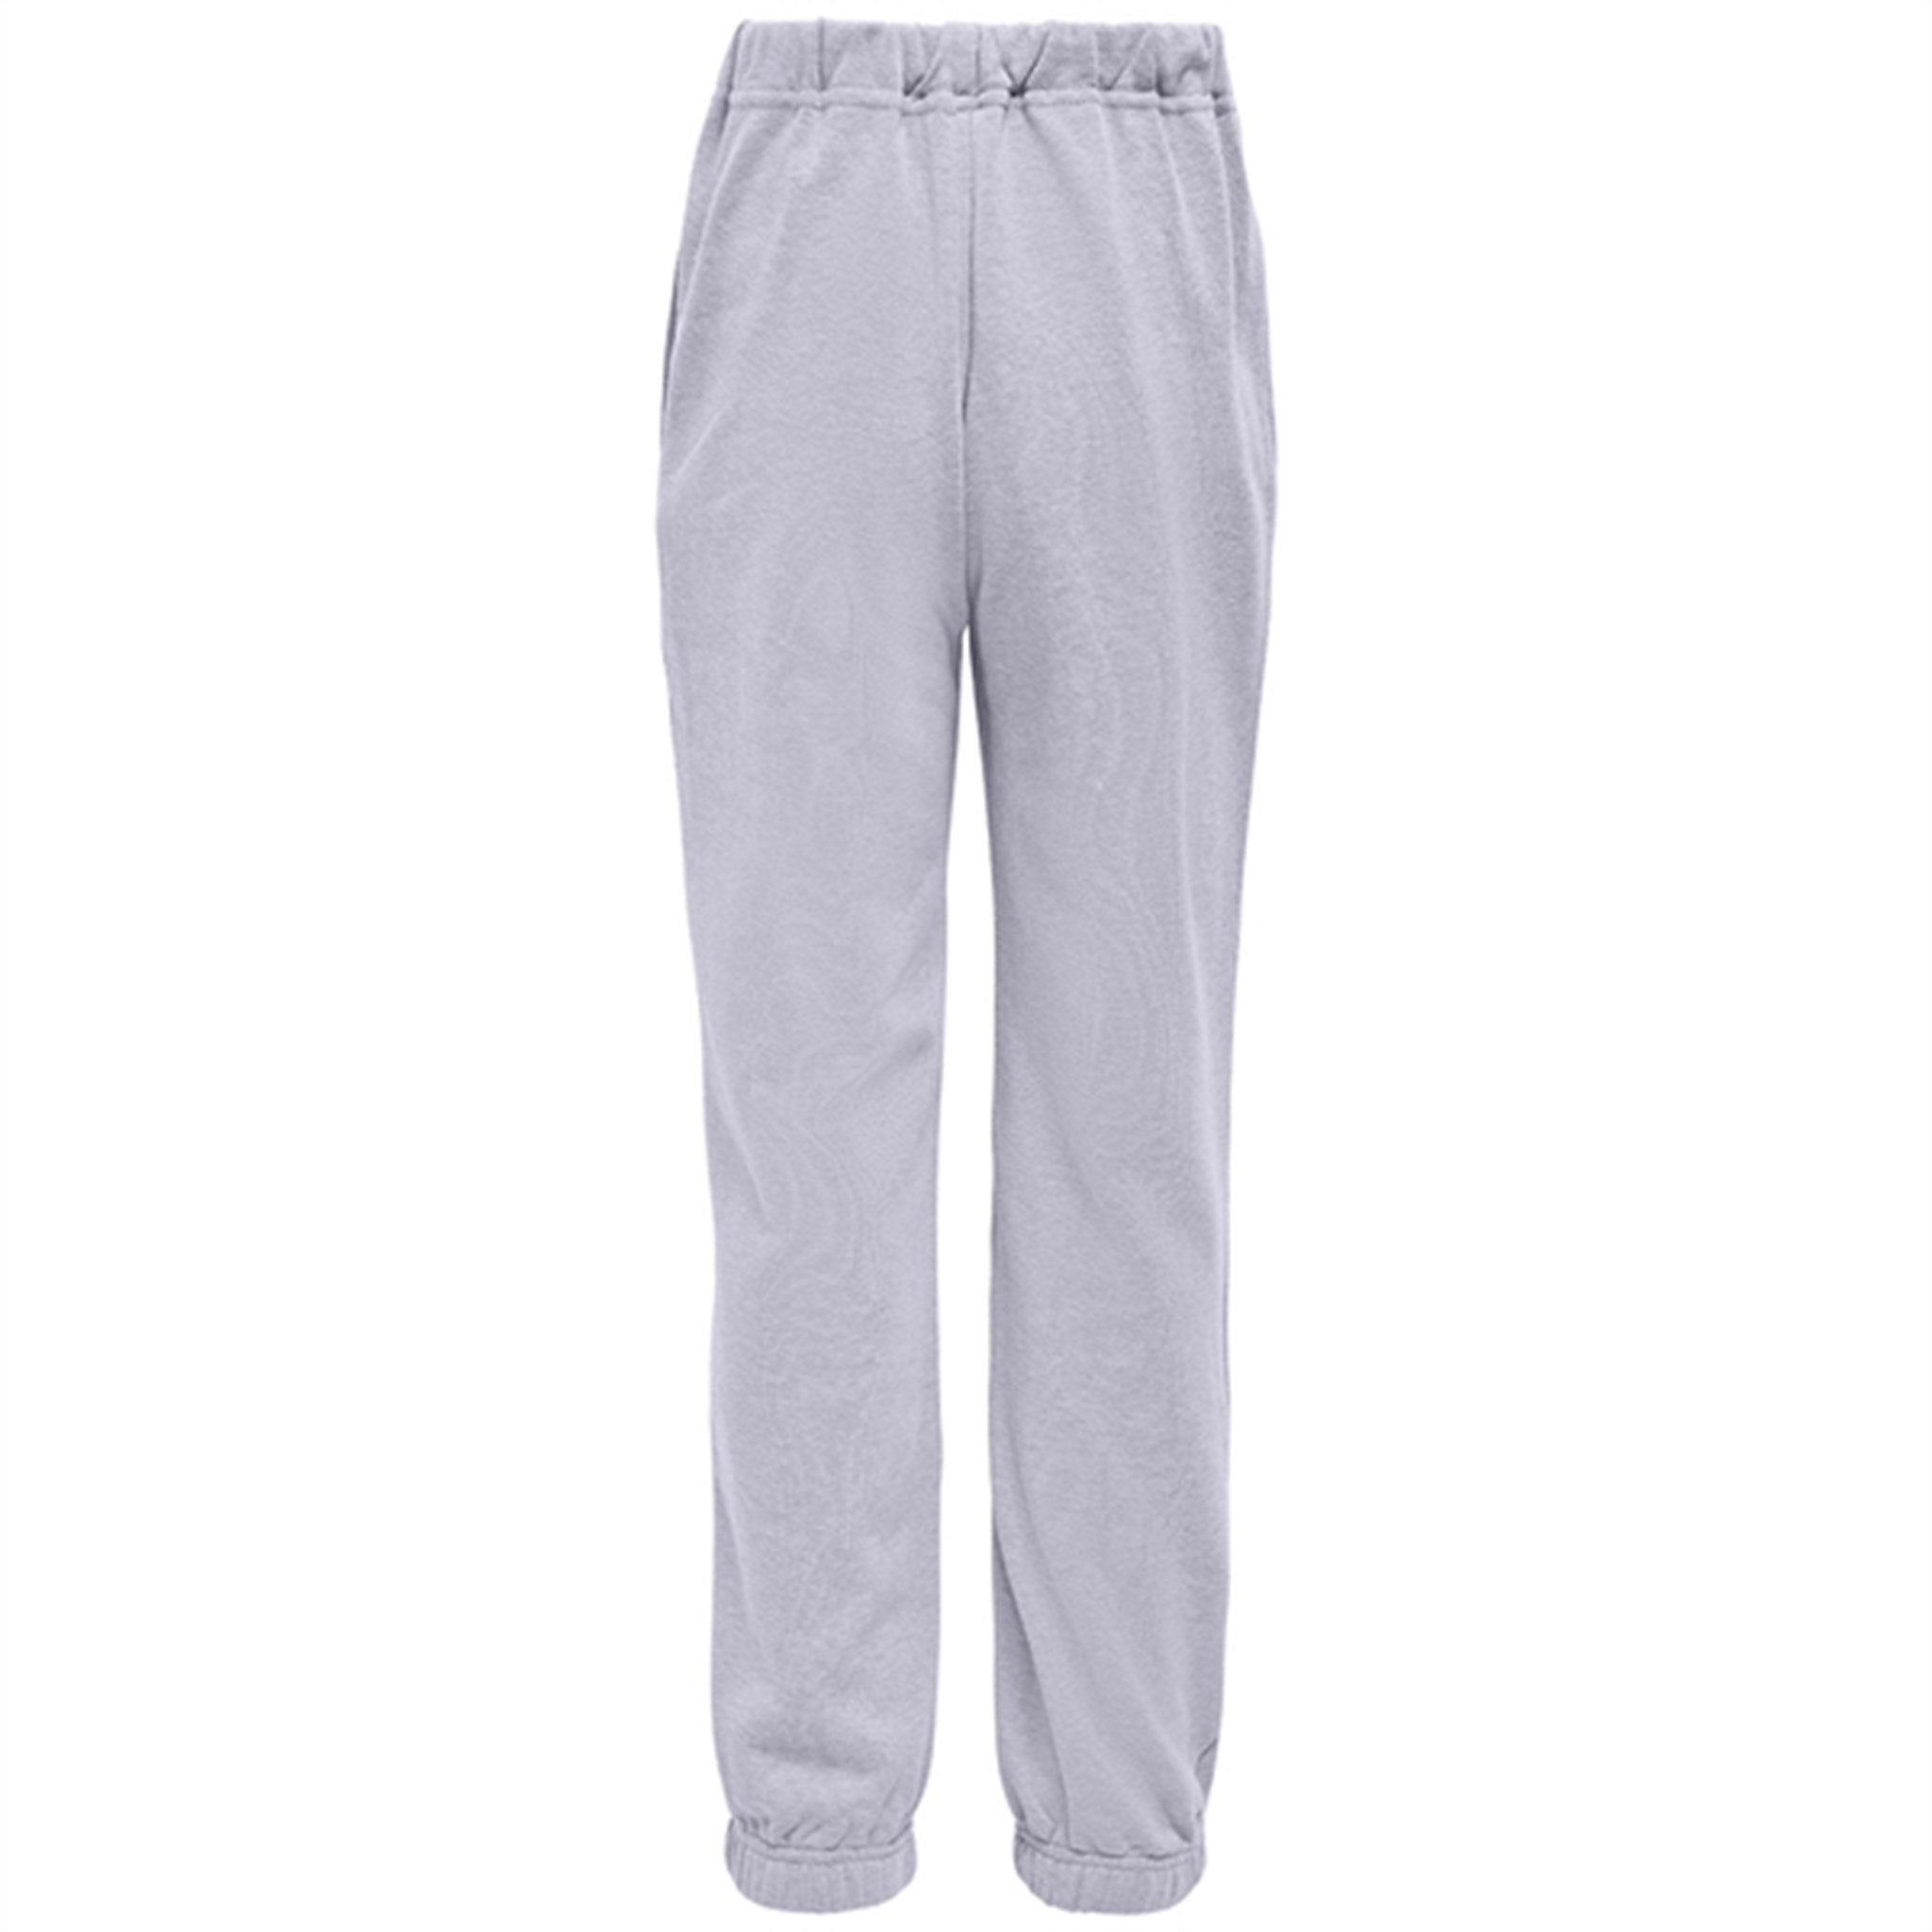 Kids ONLY Cosmic Sky Never MW Pull-Up Pants 2